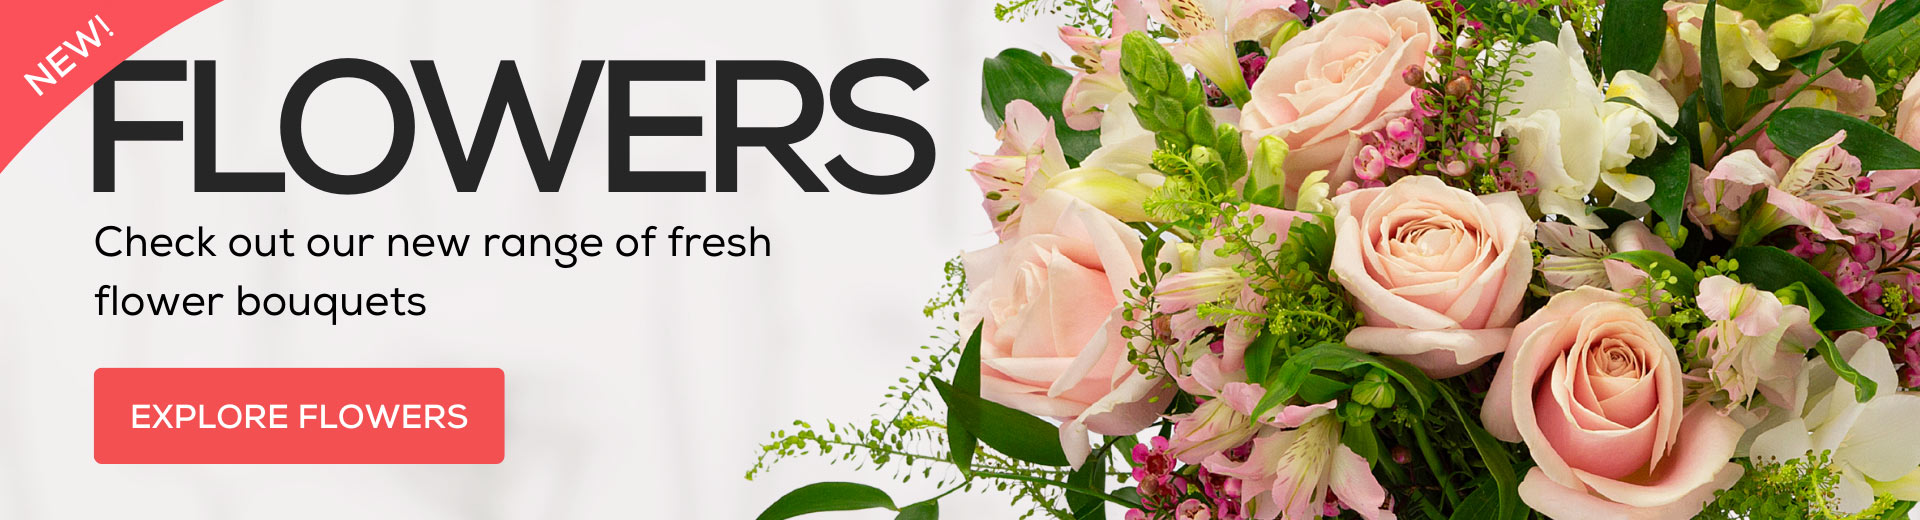 Check out our range of fresh flower bouquets